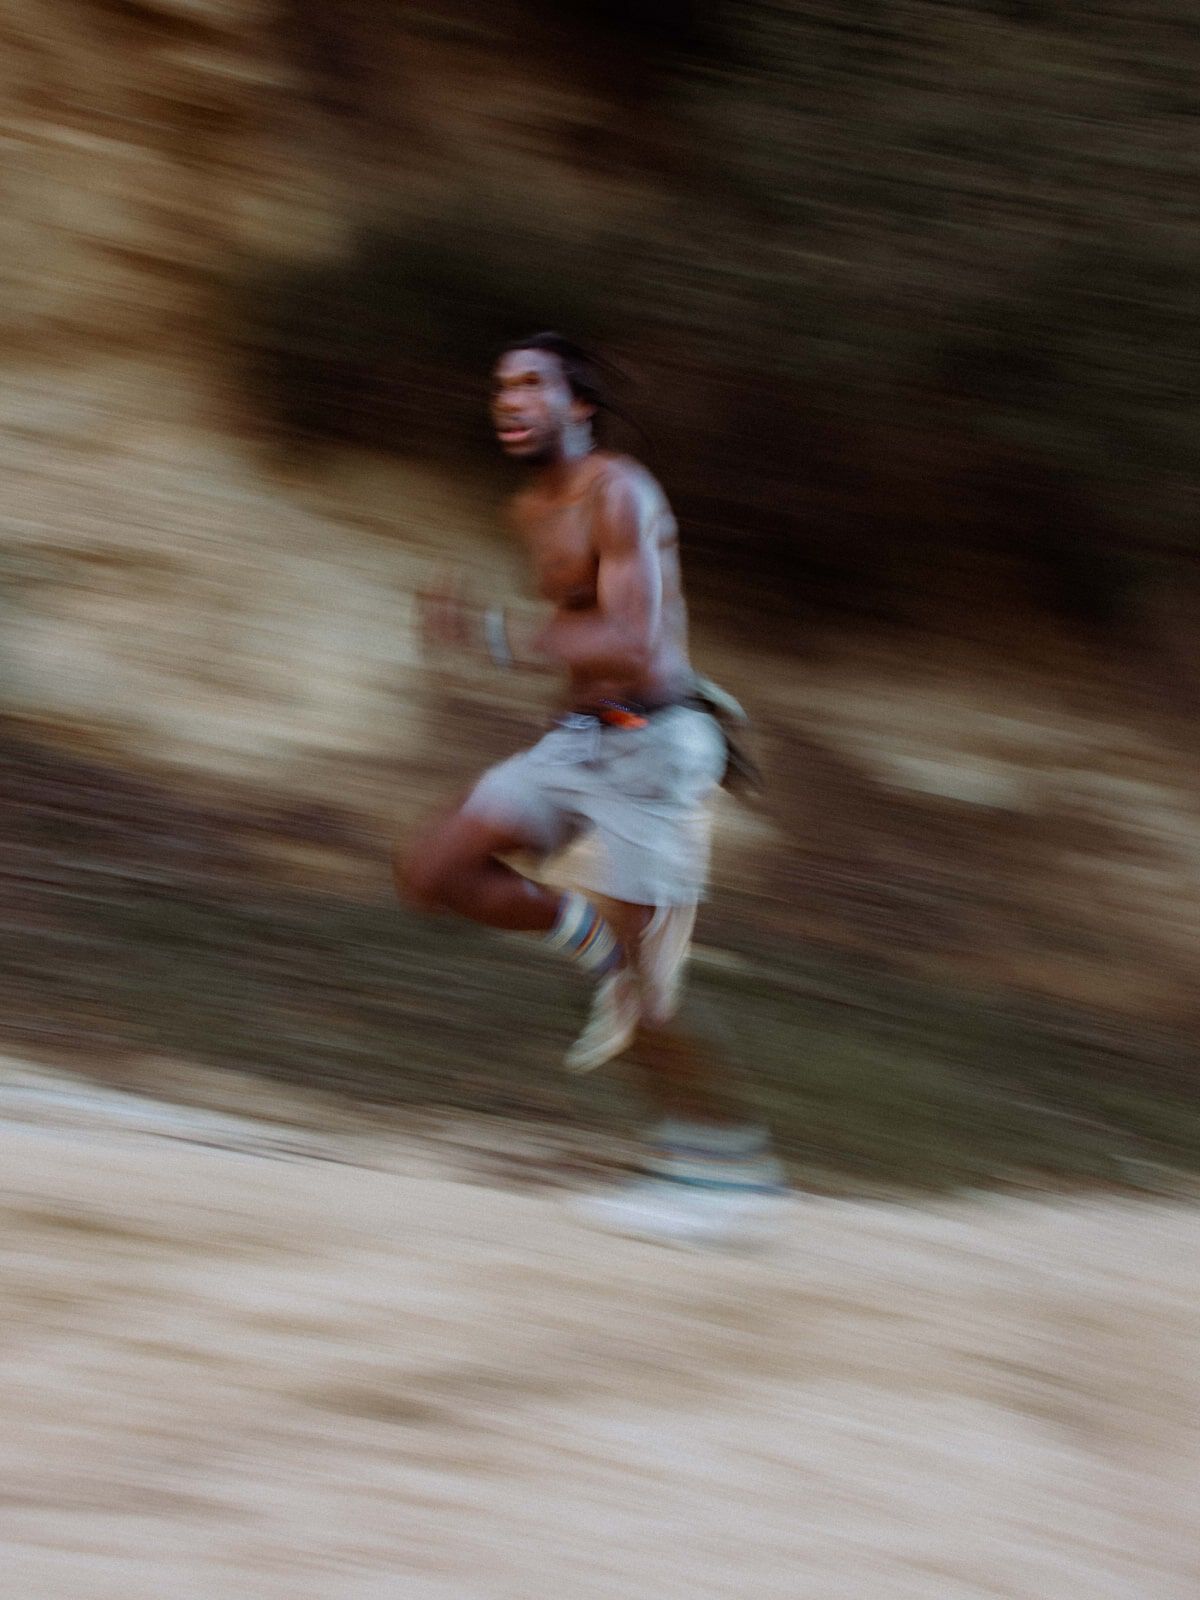 Blurry image of person running